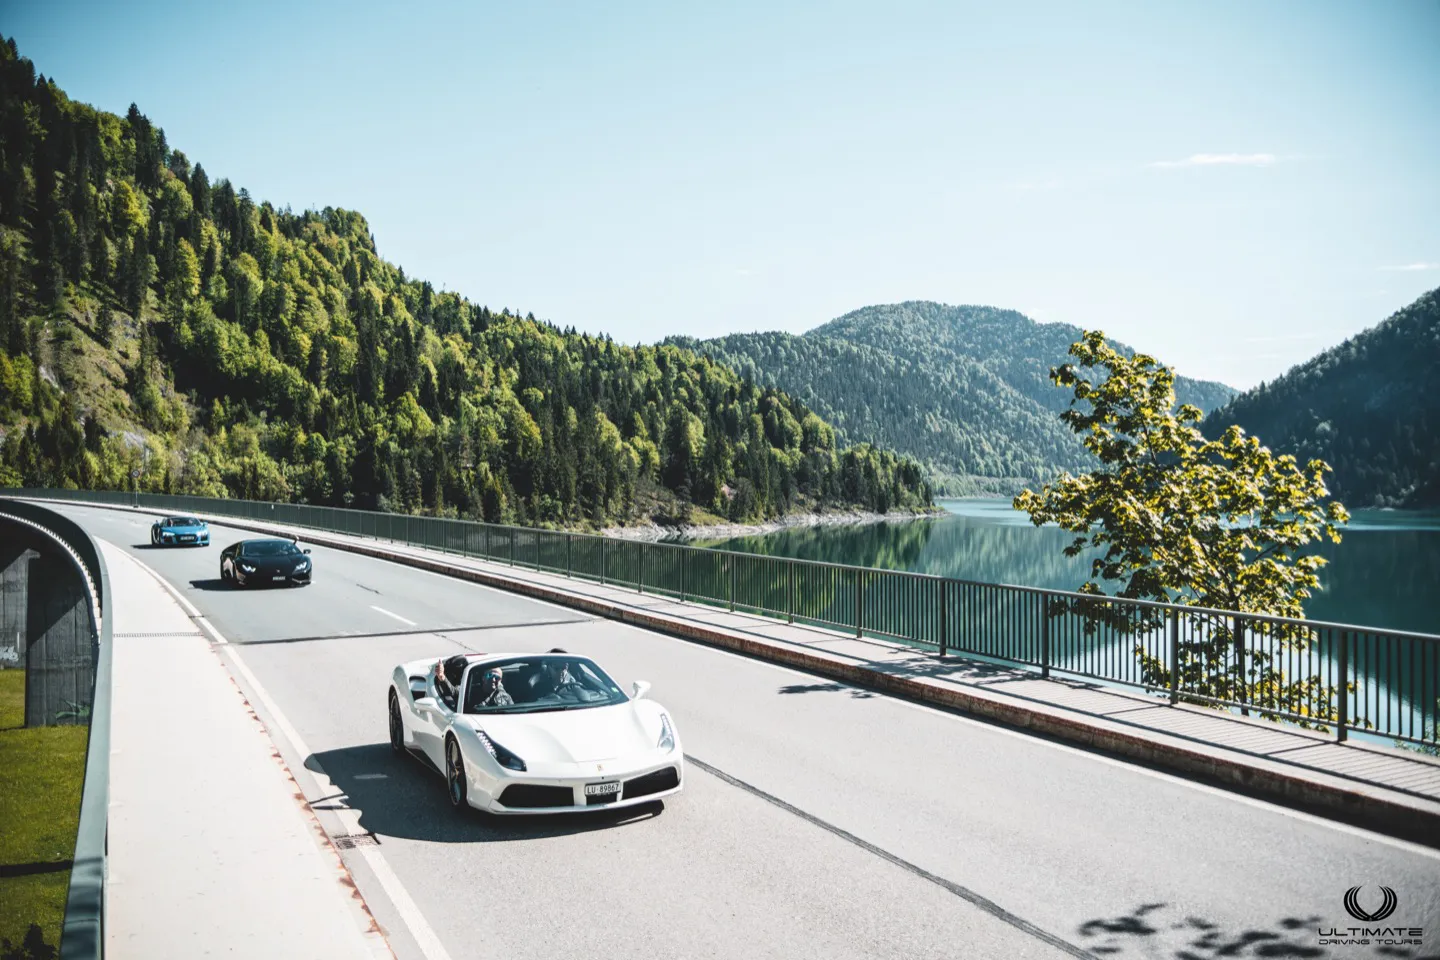 Drive a Ferrari in Champagne or Salzburg with a luxury stay and drive hotel package